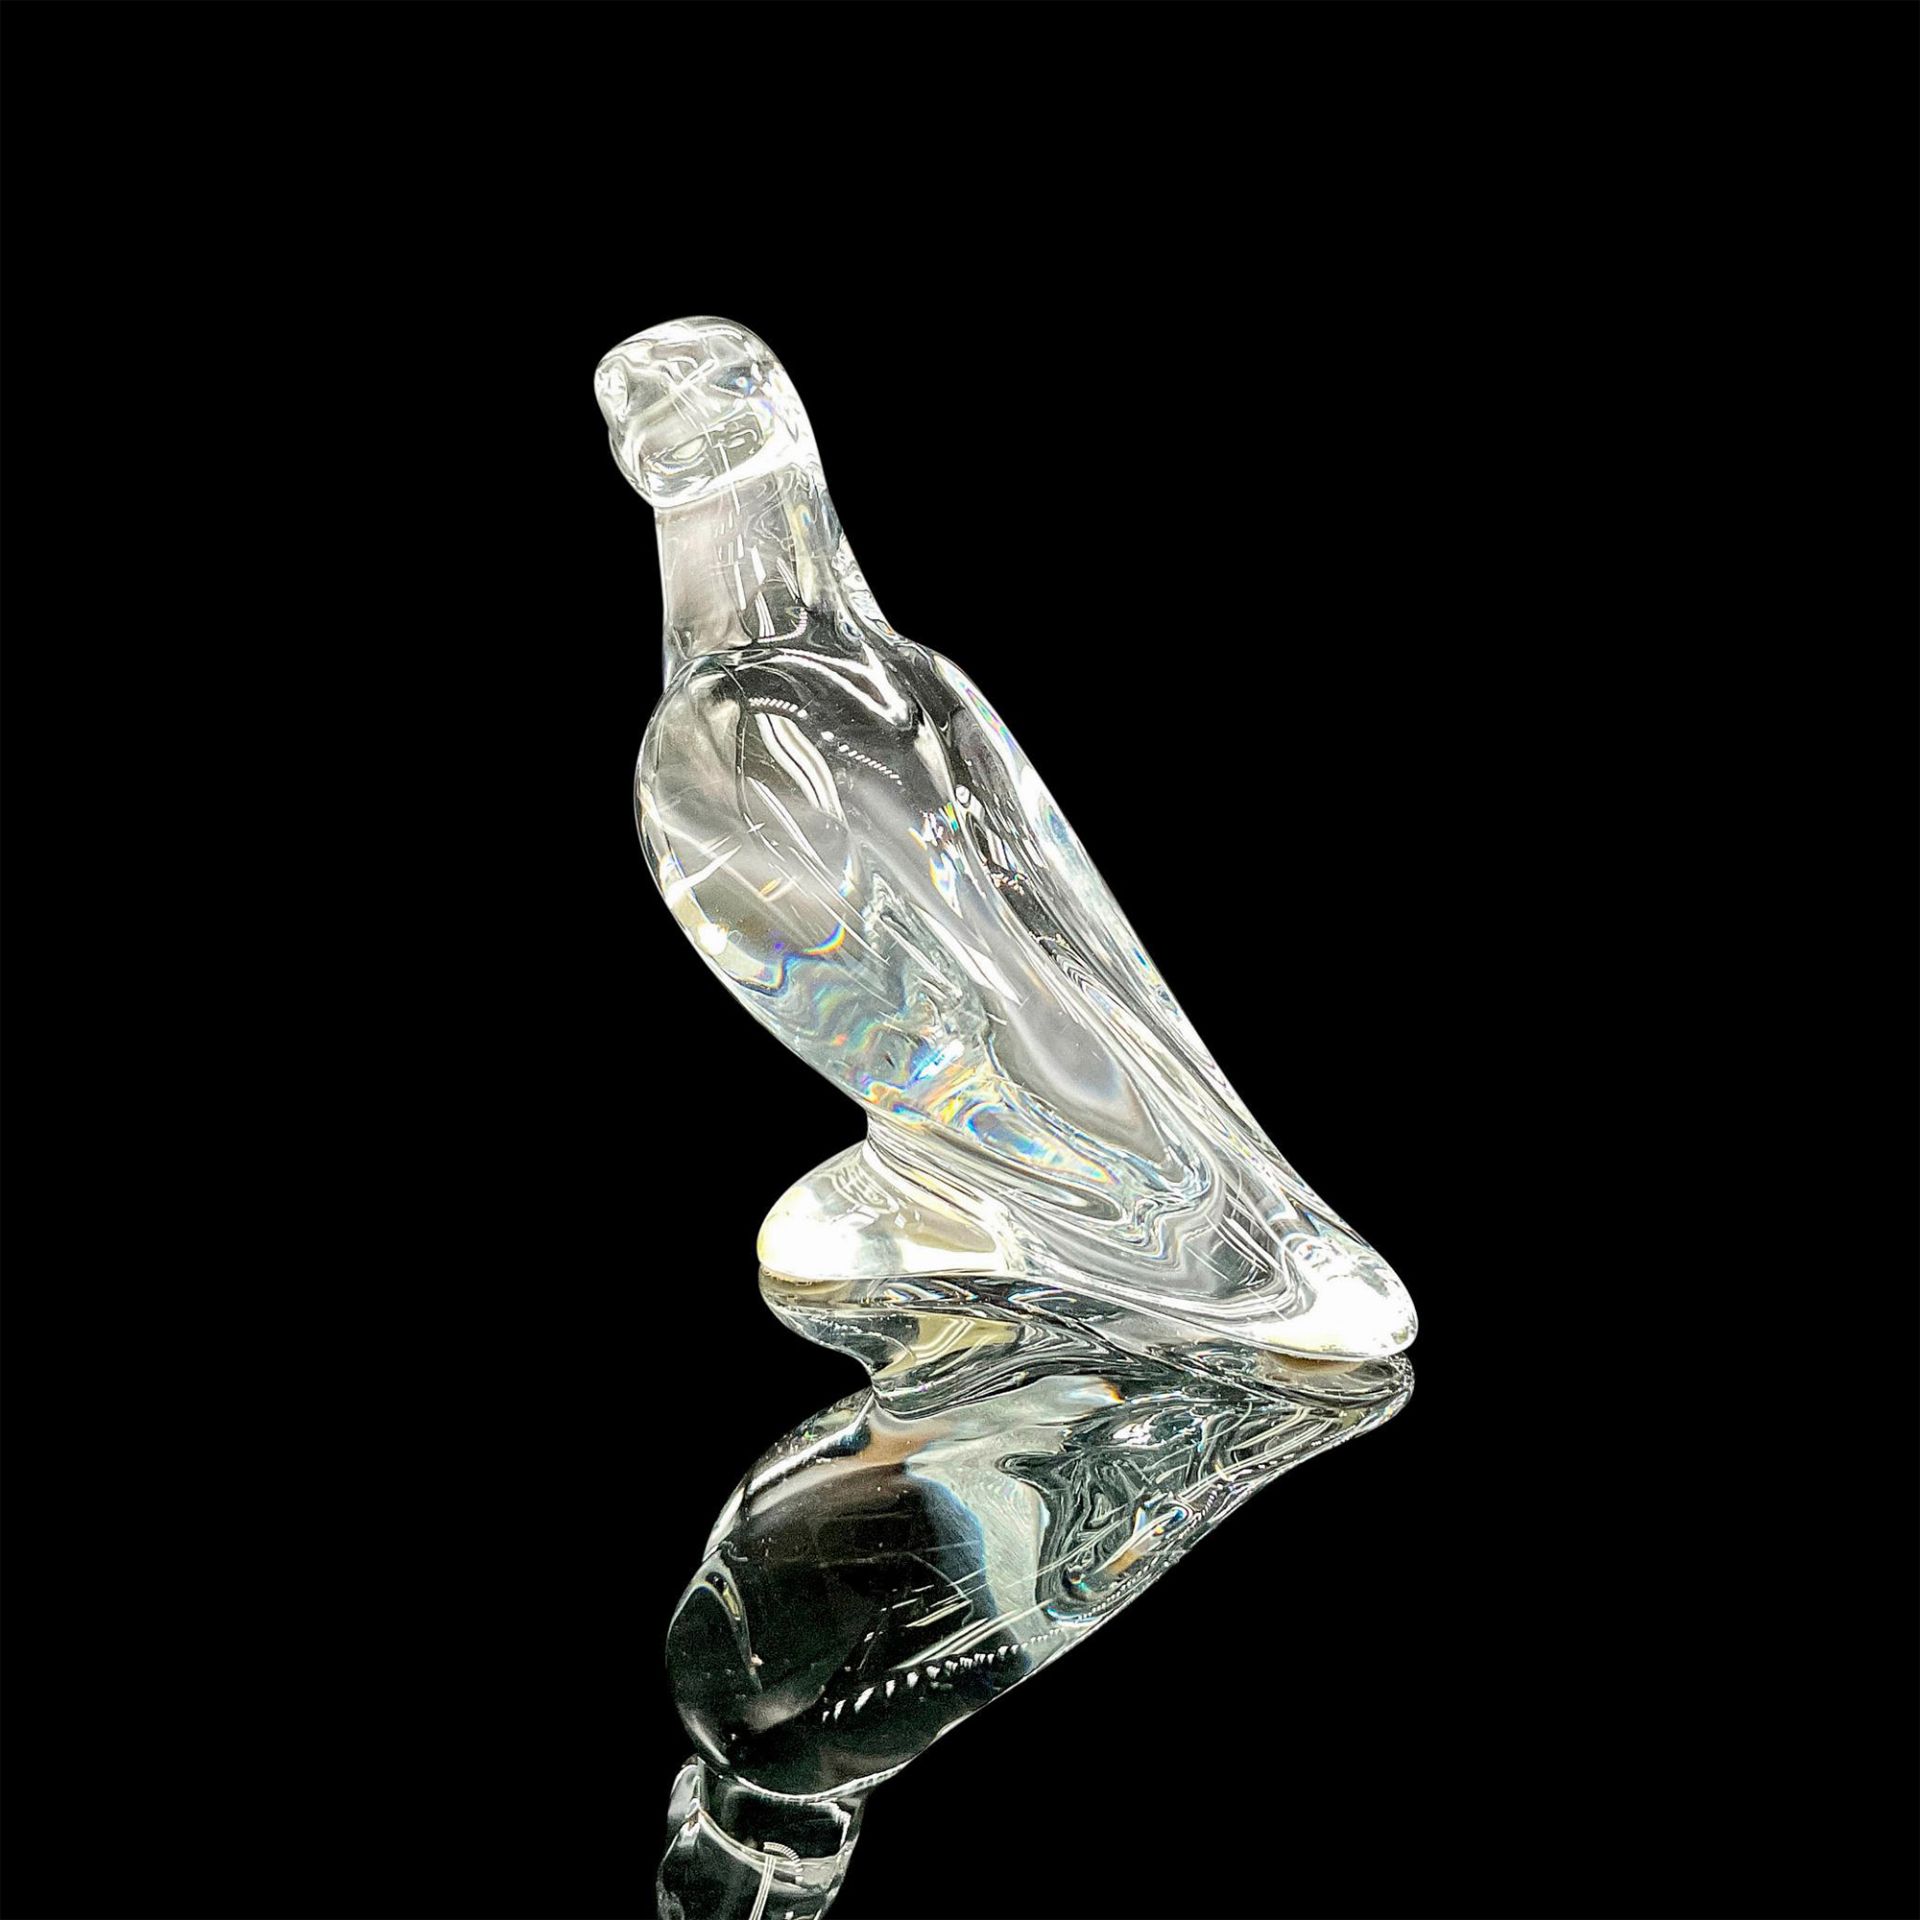 Baccarat Crystal Figurine, Parrot - Image 2 of 4